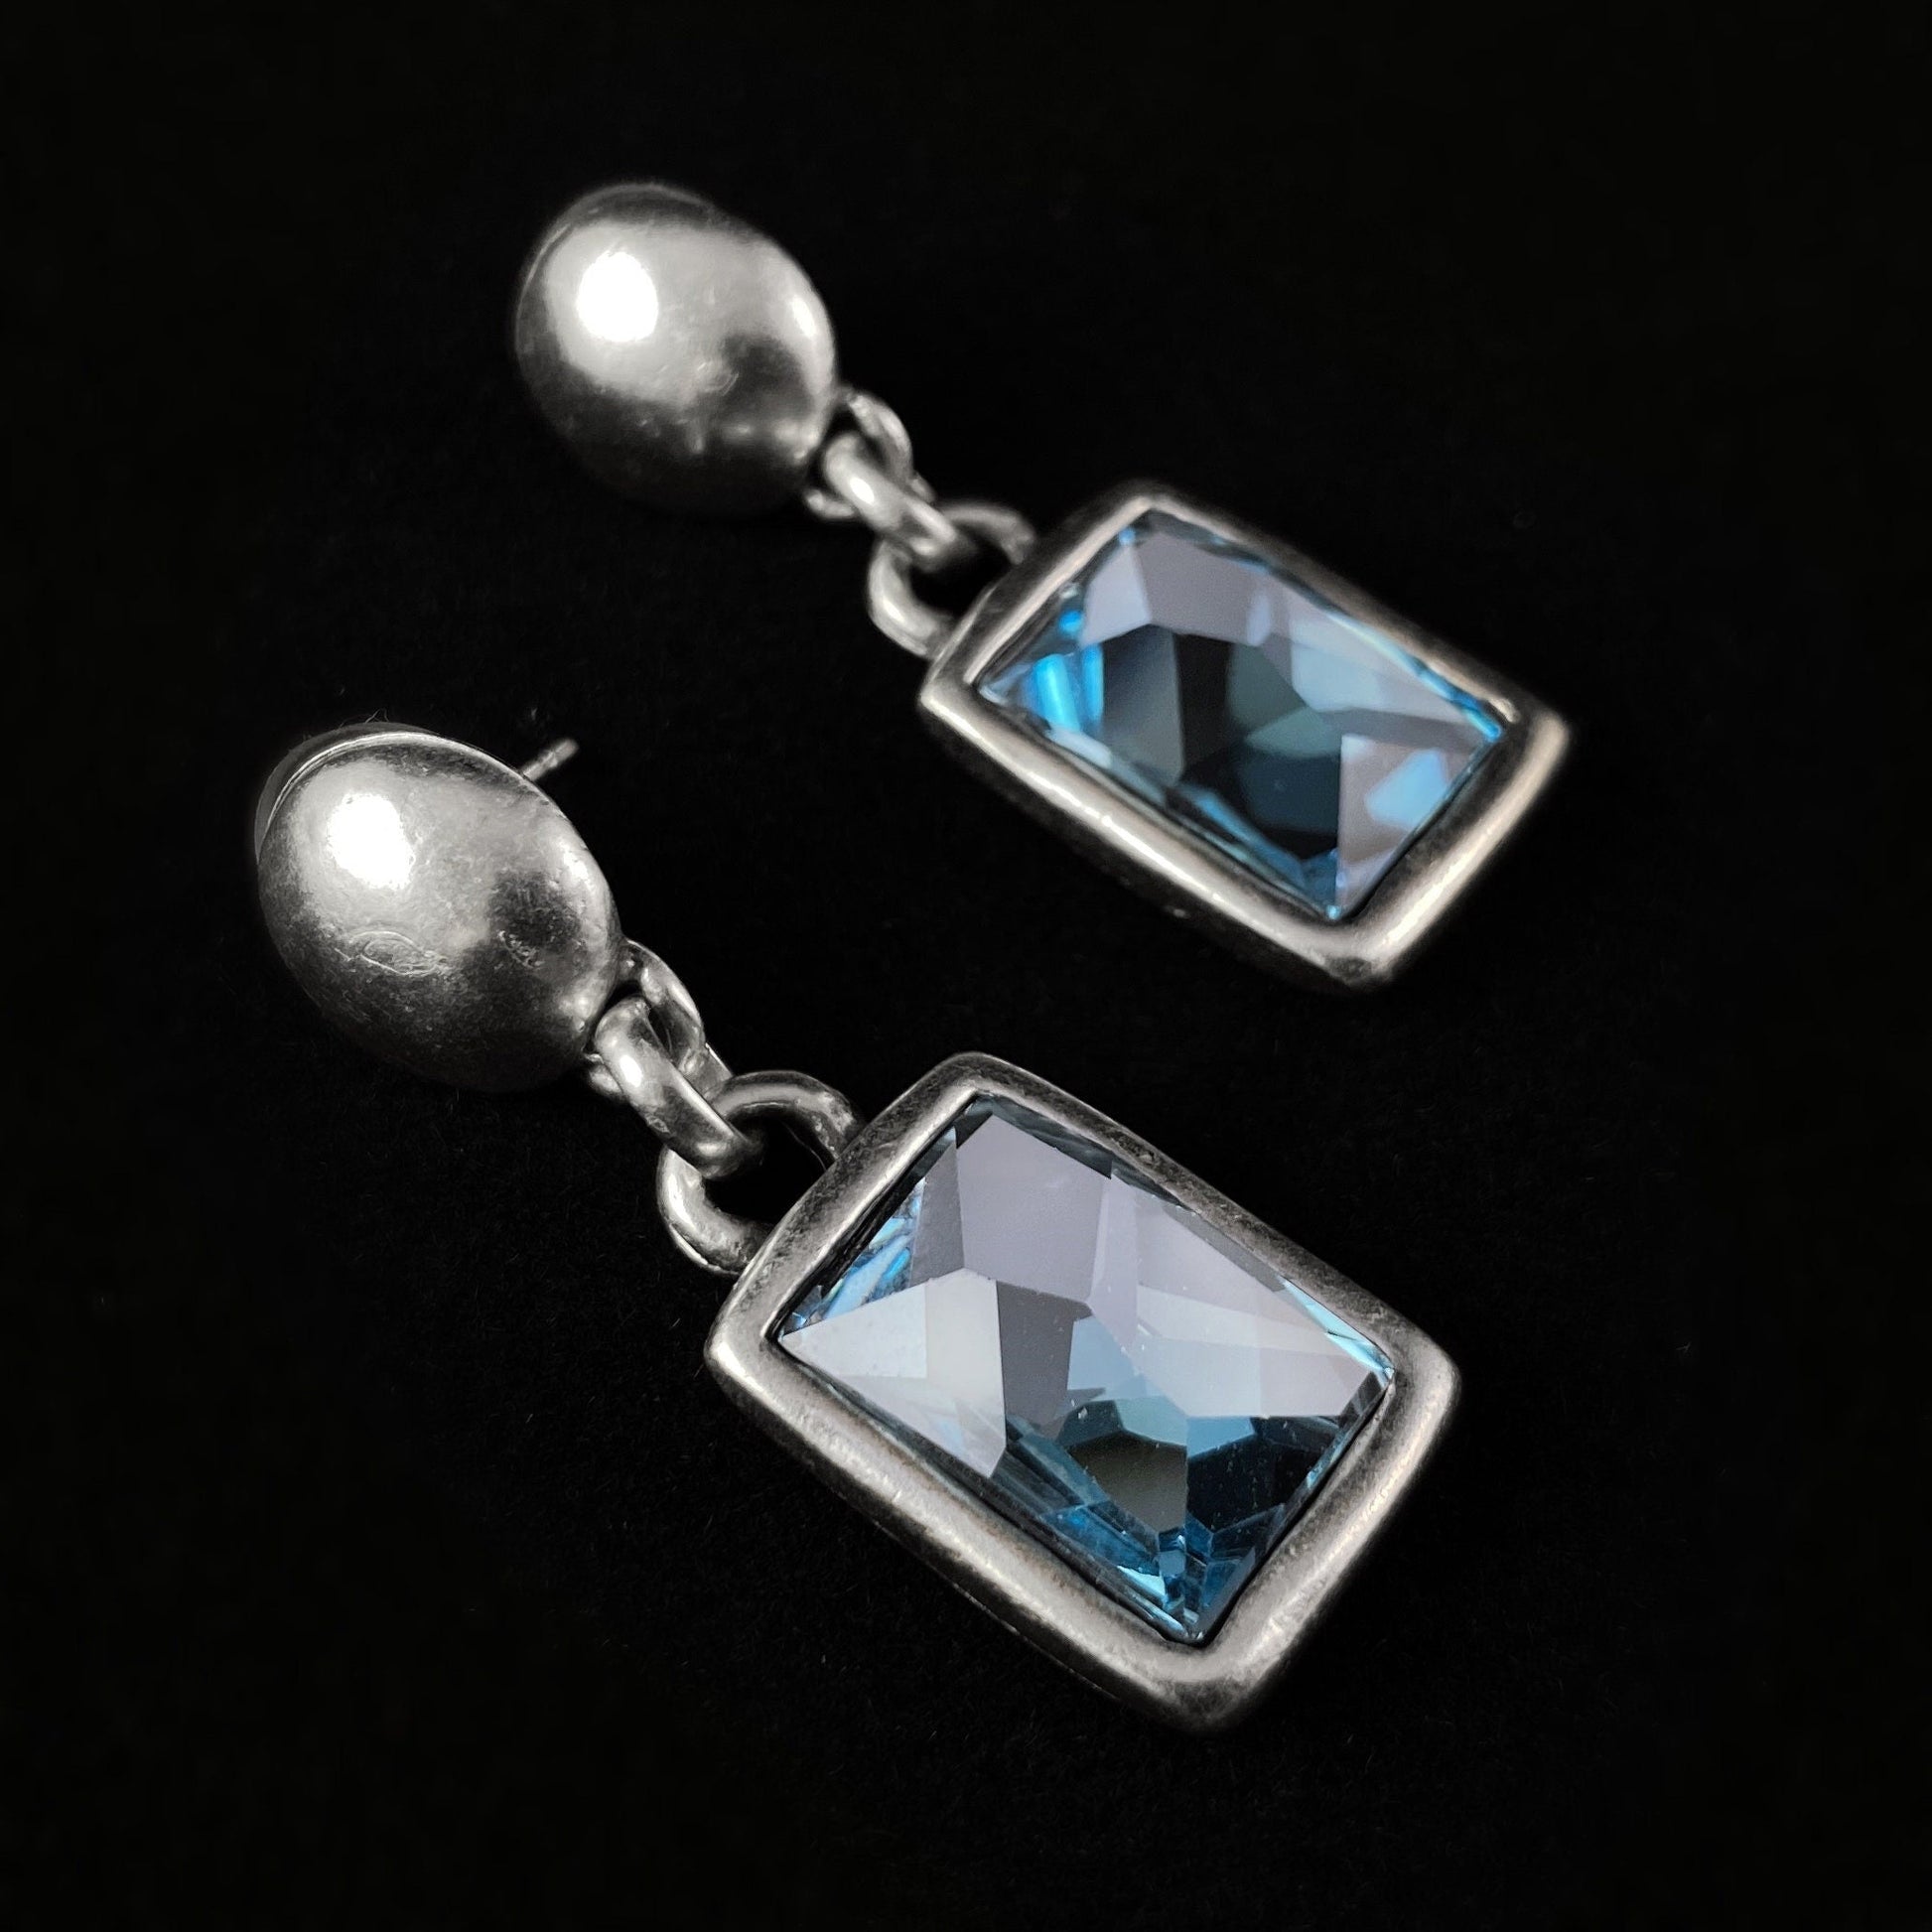 Silver Rectangle Drop Earrings with Blue Crystal, Handmade, Nickel Free - Elegant Jewelry for Women